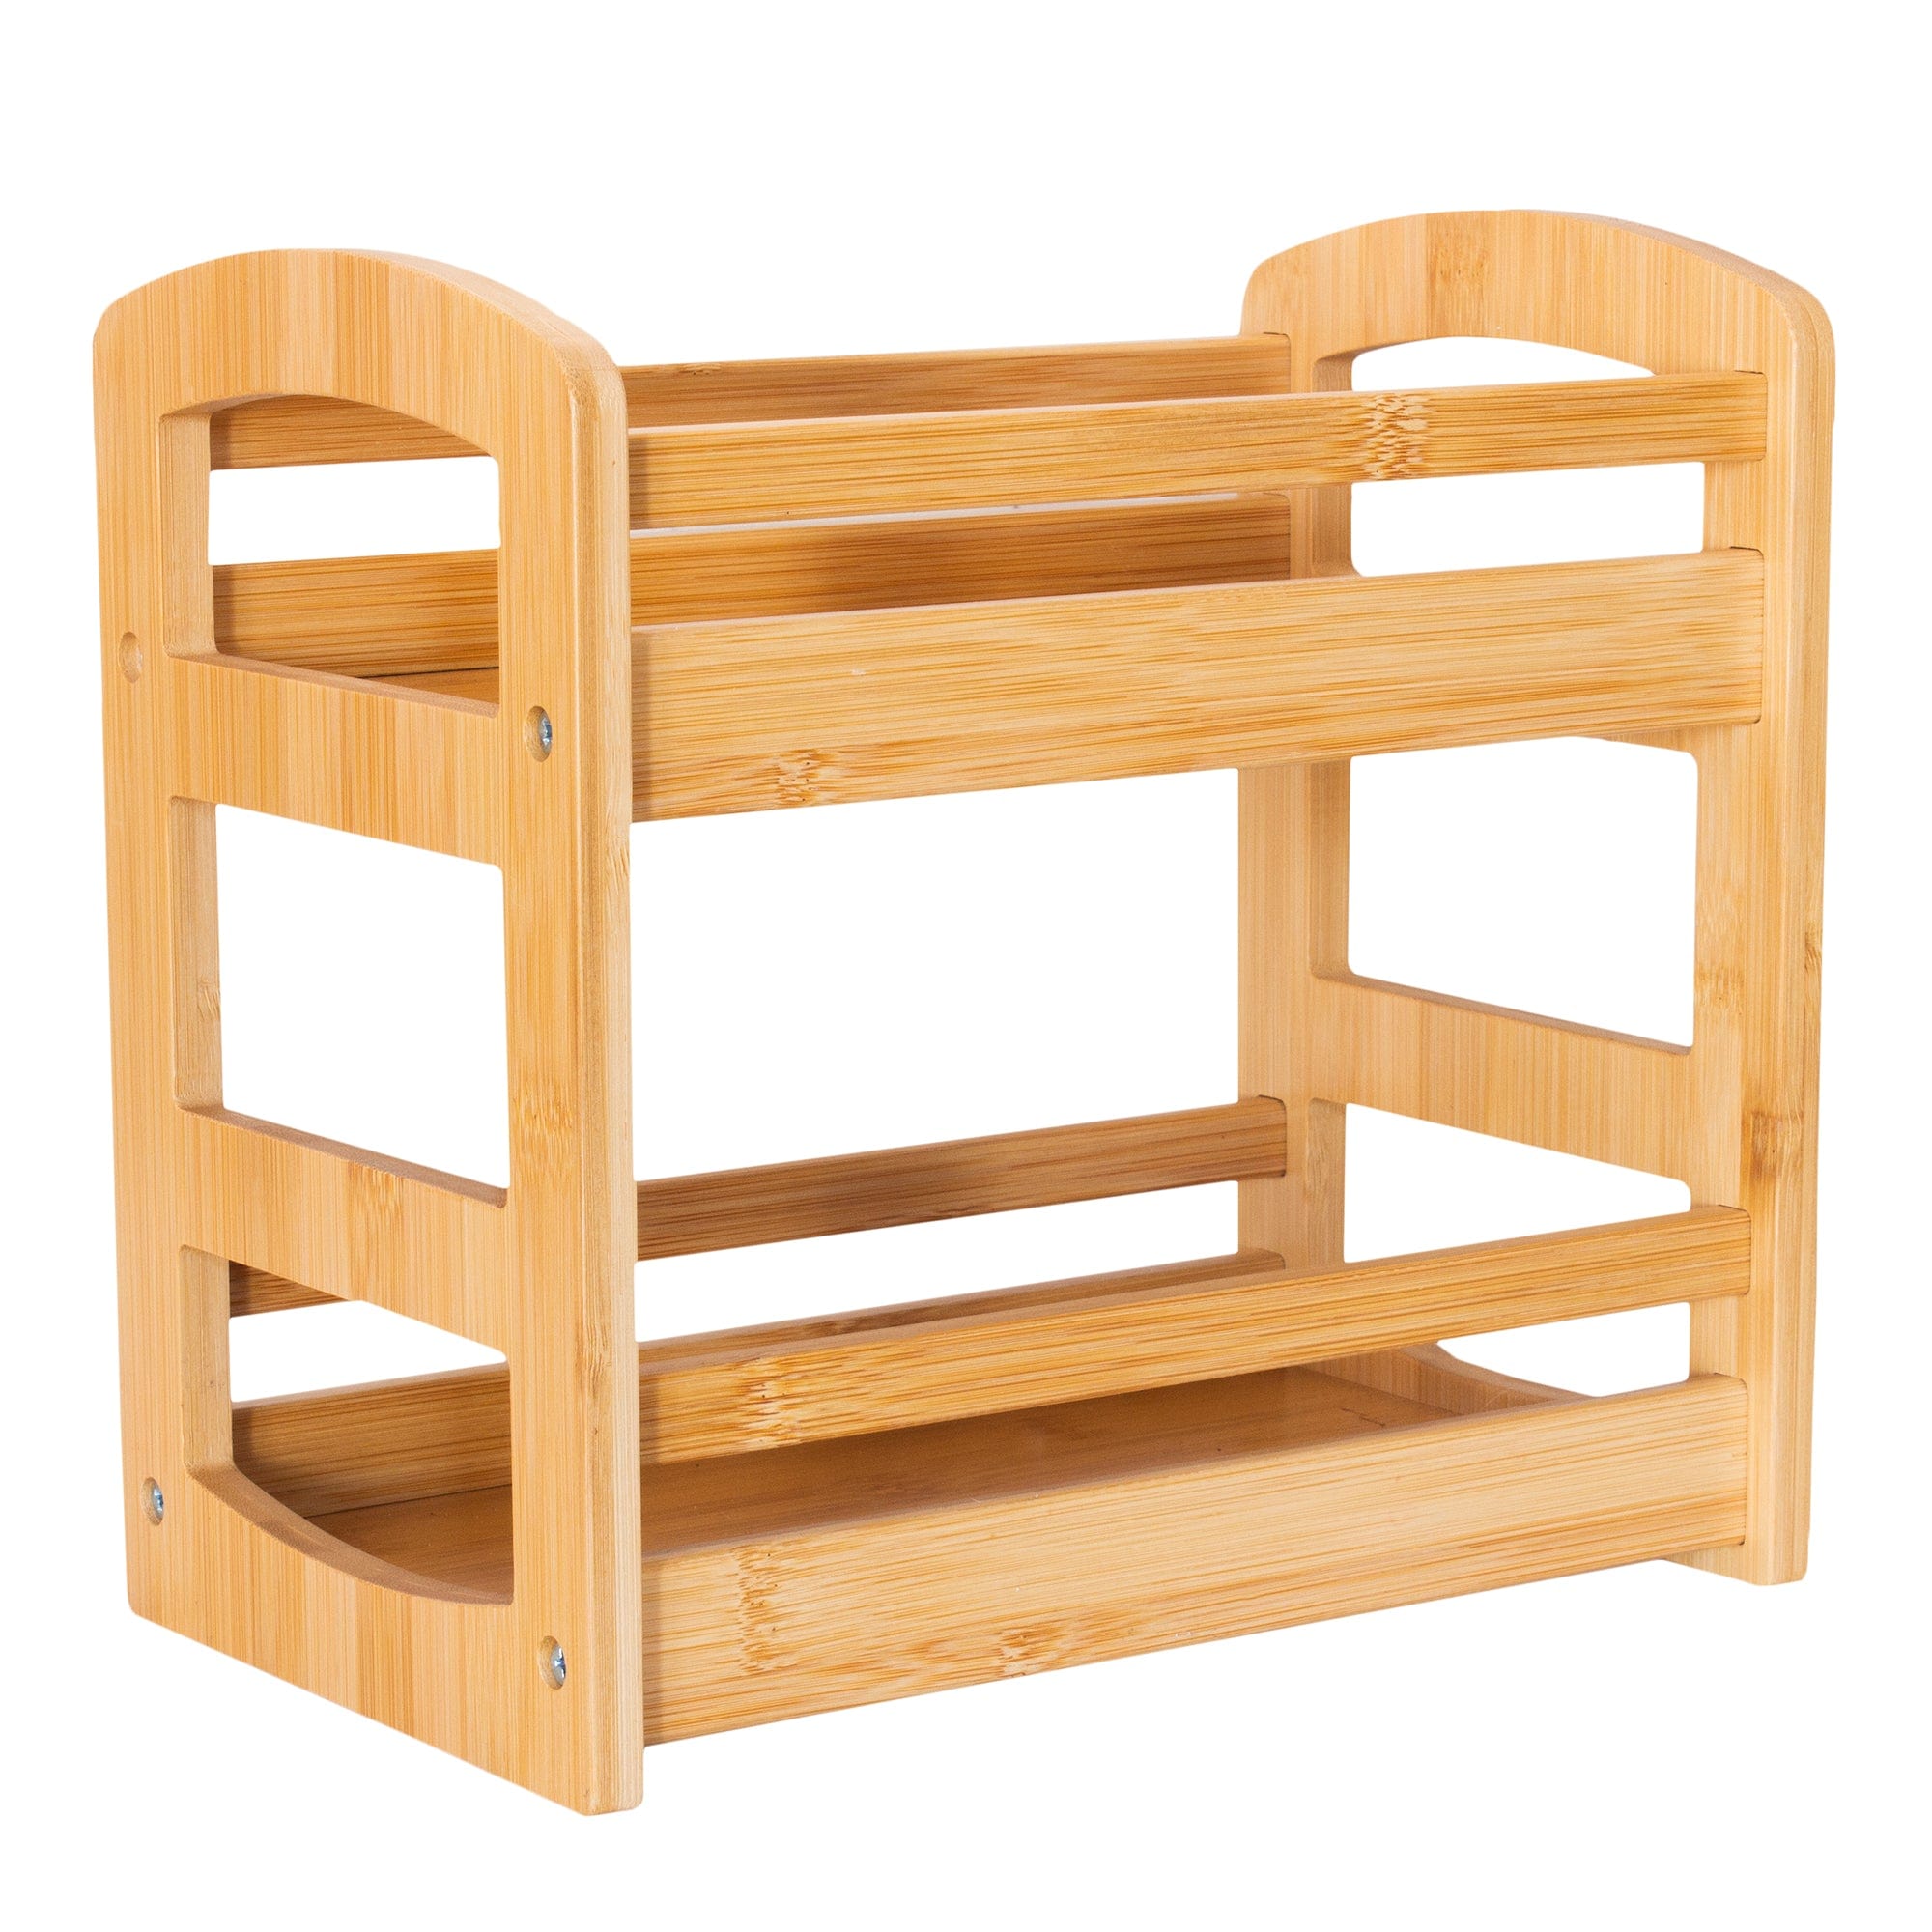 Totally Bamboo 2-Tier Spice Caddy